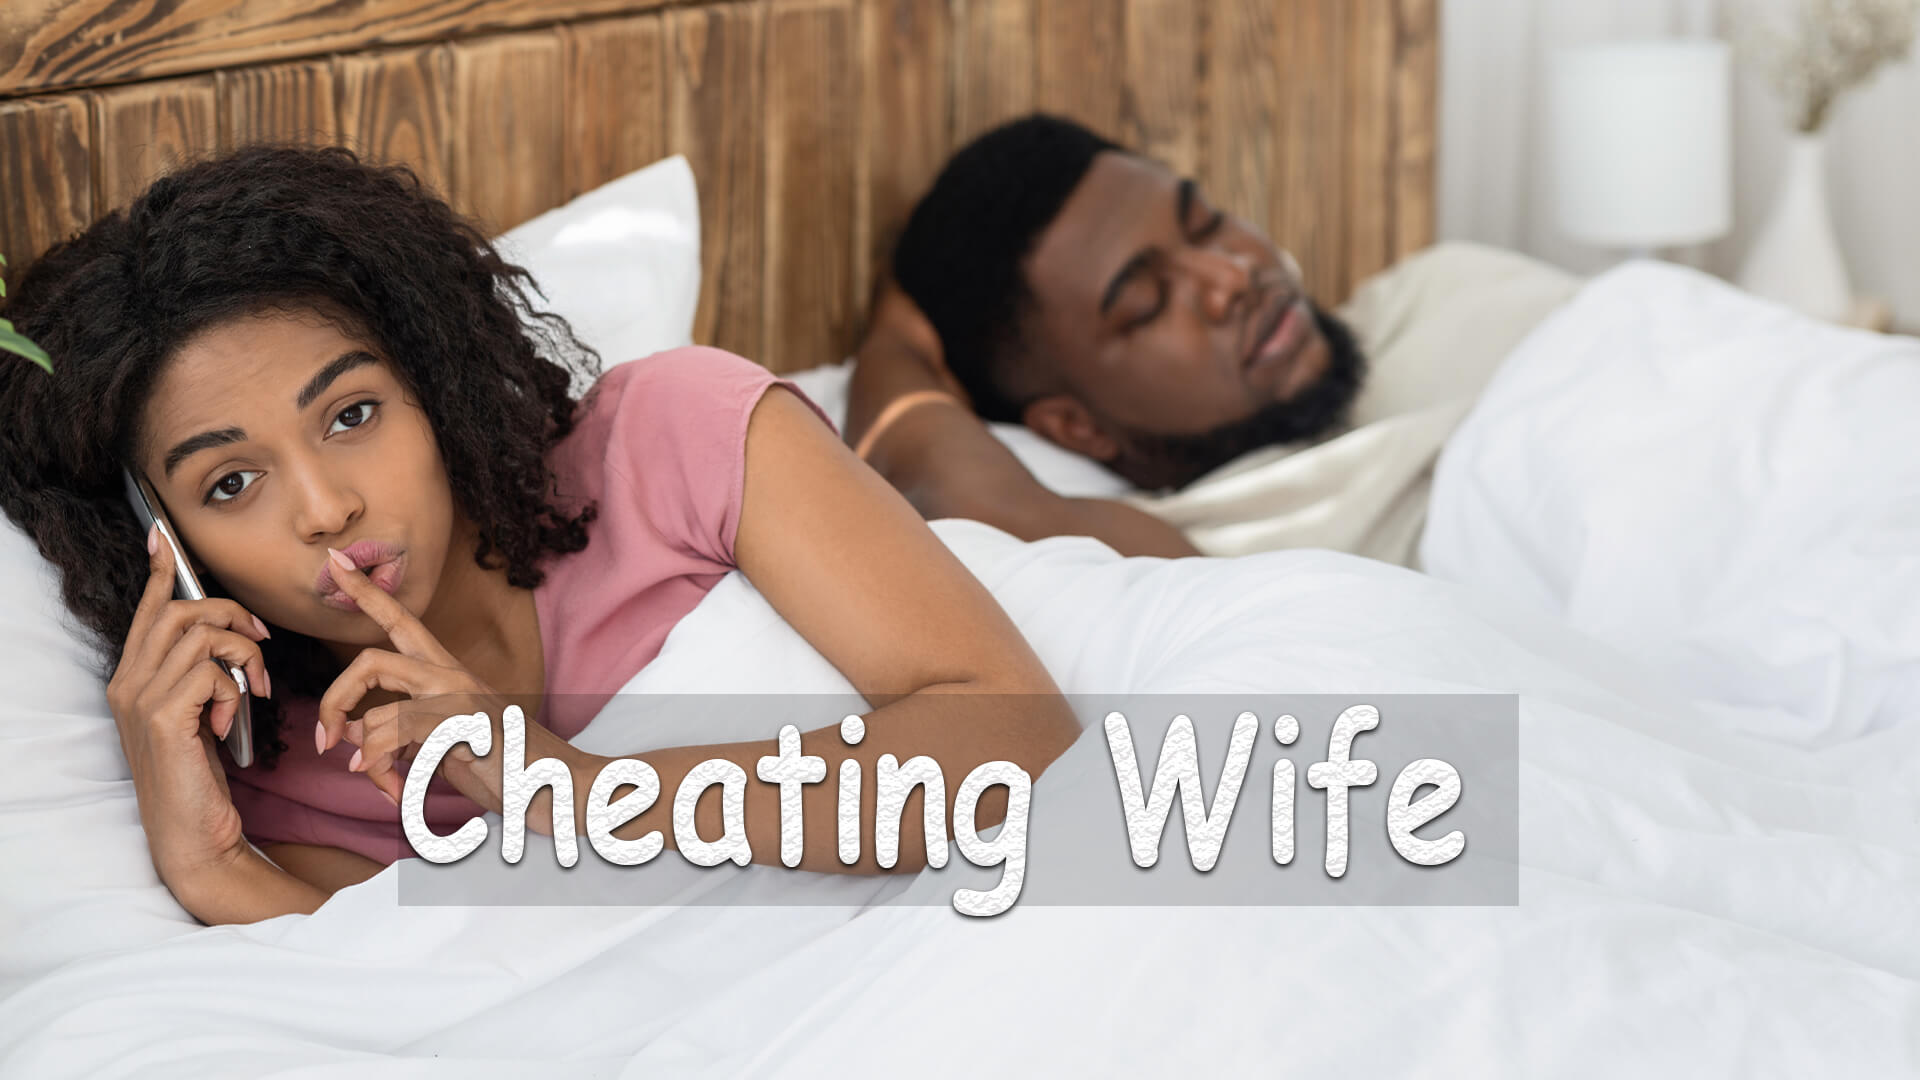 terrible confessions  - cheating wife - Cheating wife